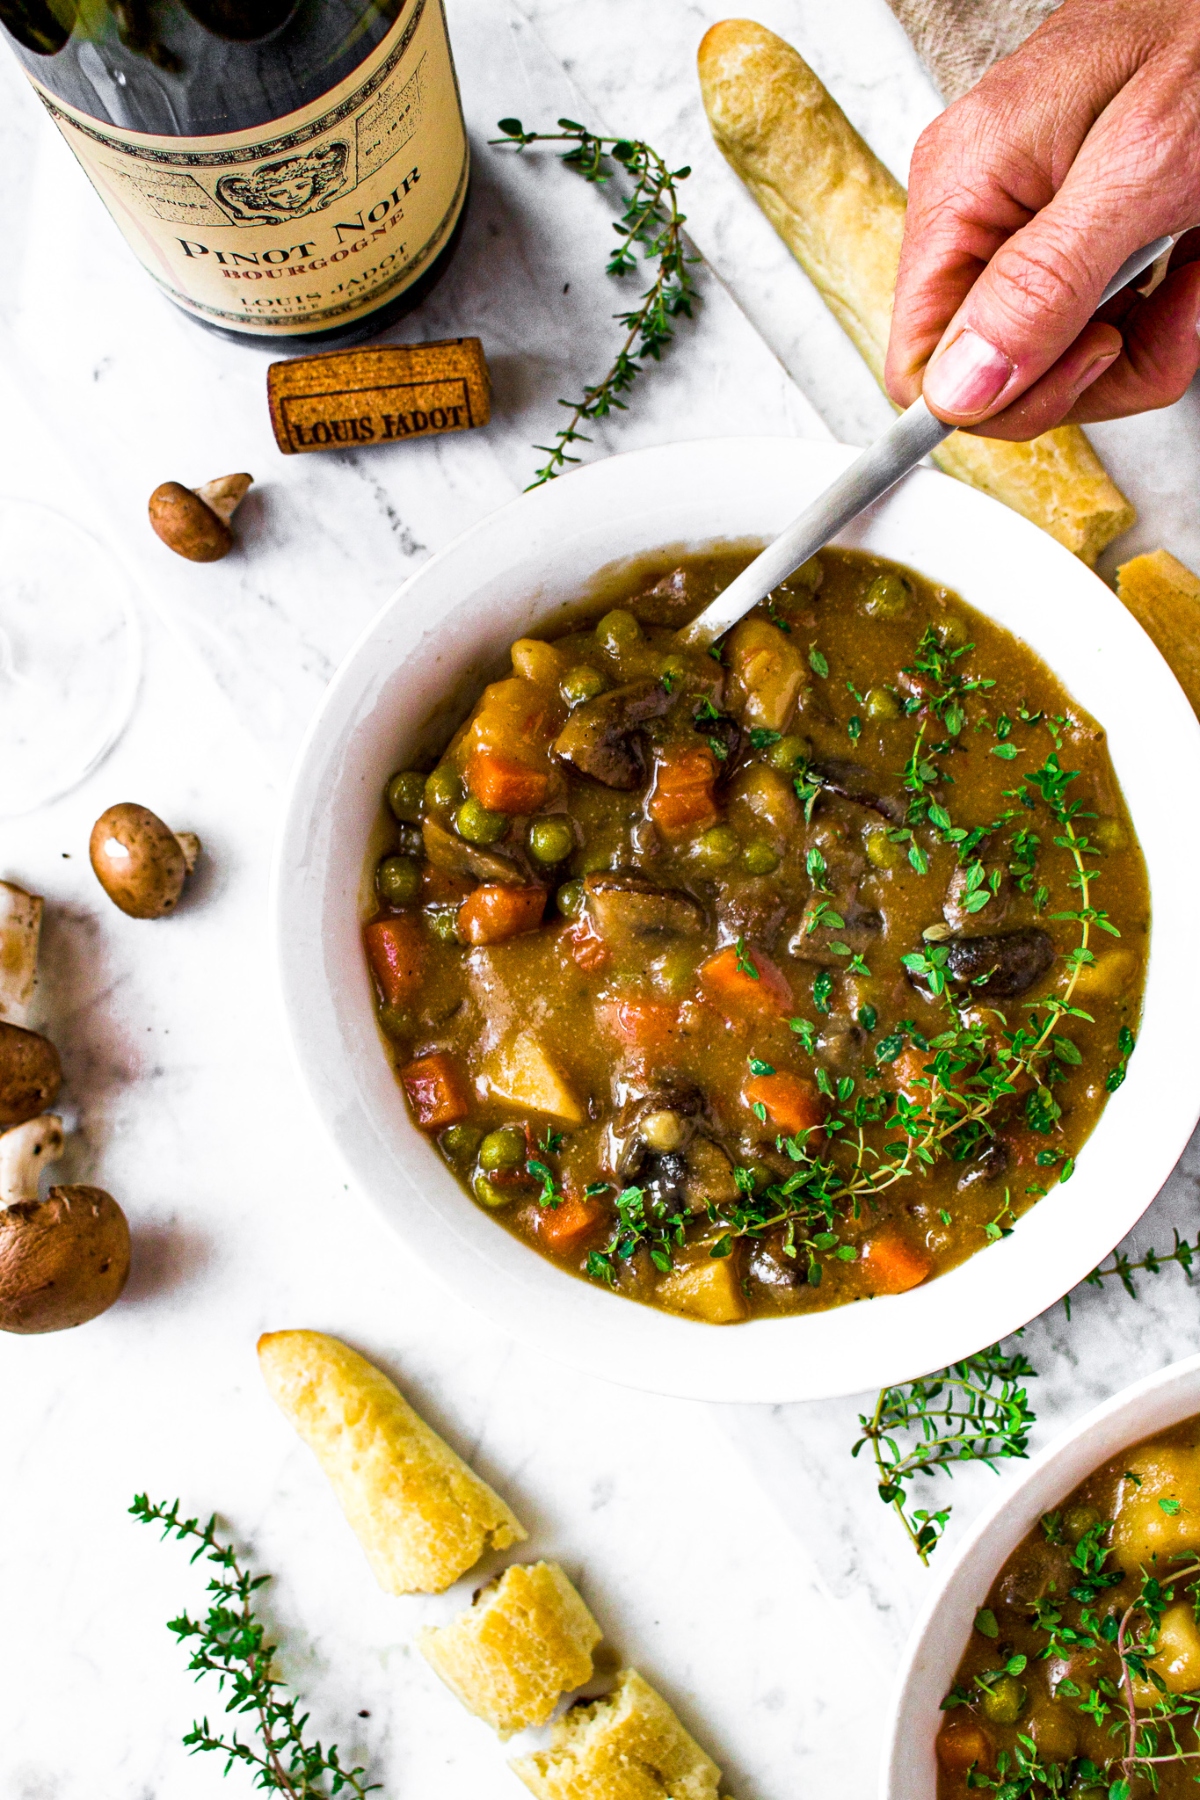 This hearty, vegan mushroom stew recipe is easy to make and sure to please! Packed with root vegetables, earthy herbs, and meaty mushrooms swimming in a thick, velvety broth, this may quickly become your new favorite vegetarian winter dinner!